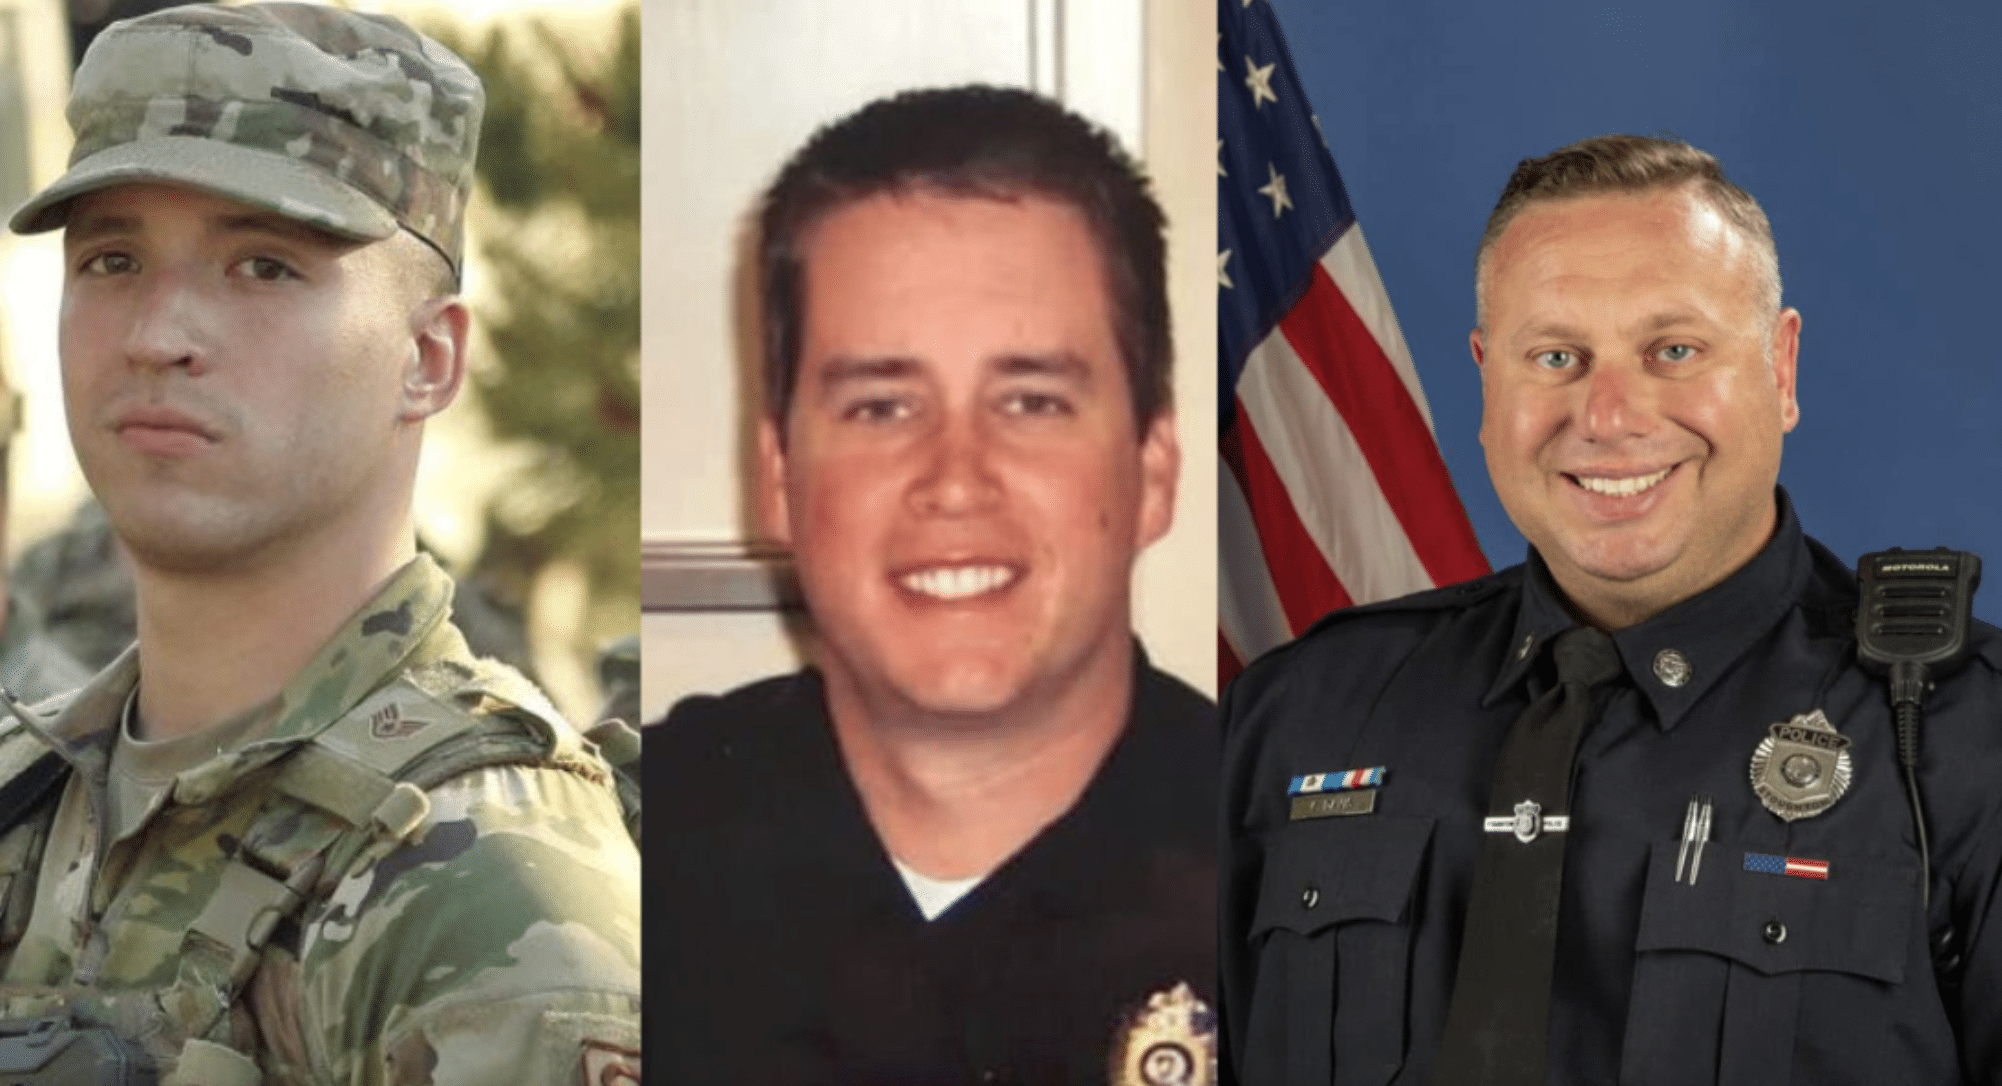 Three Massachusetts law enforcement officers die suddenly within four days